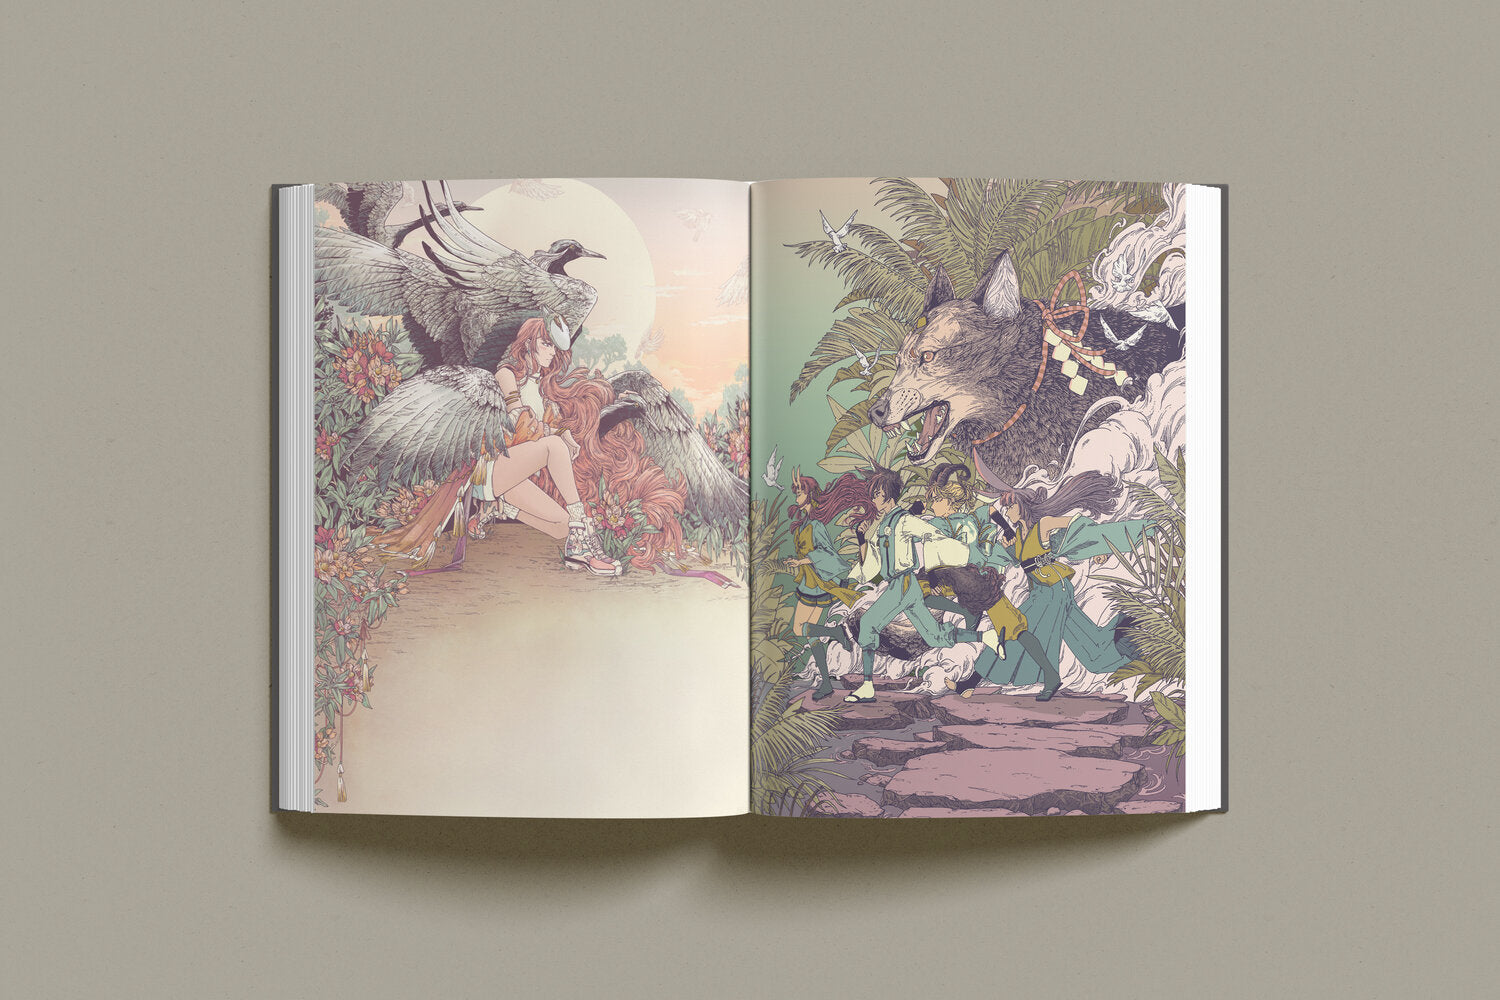 Img of an open book. The left hand side shows an illustration of a masked woman kneeling there are cranes flying and flowers. The right hand side is of teens running from a giant wolf in a tropical enviroment.